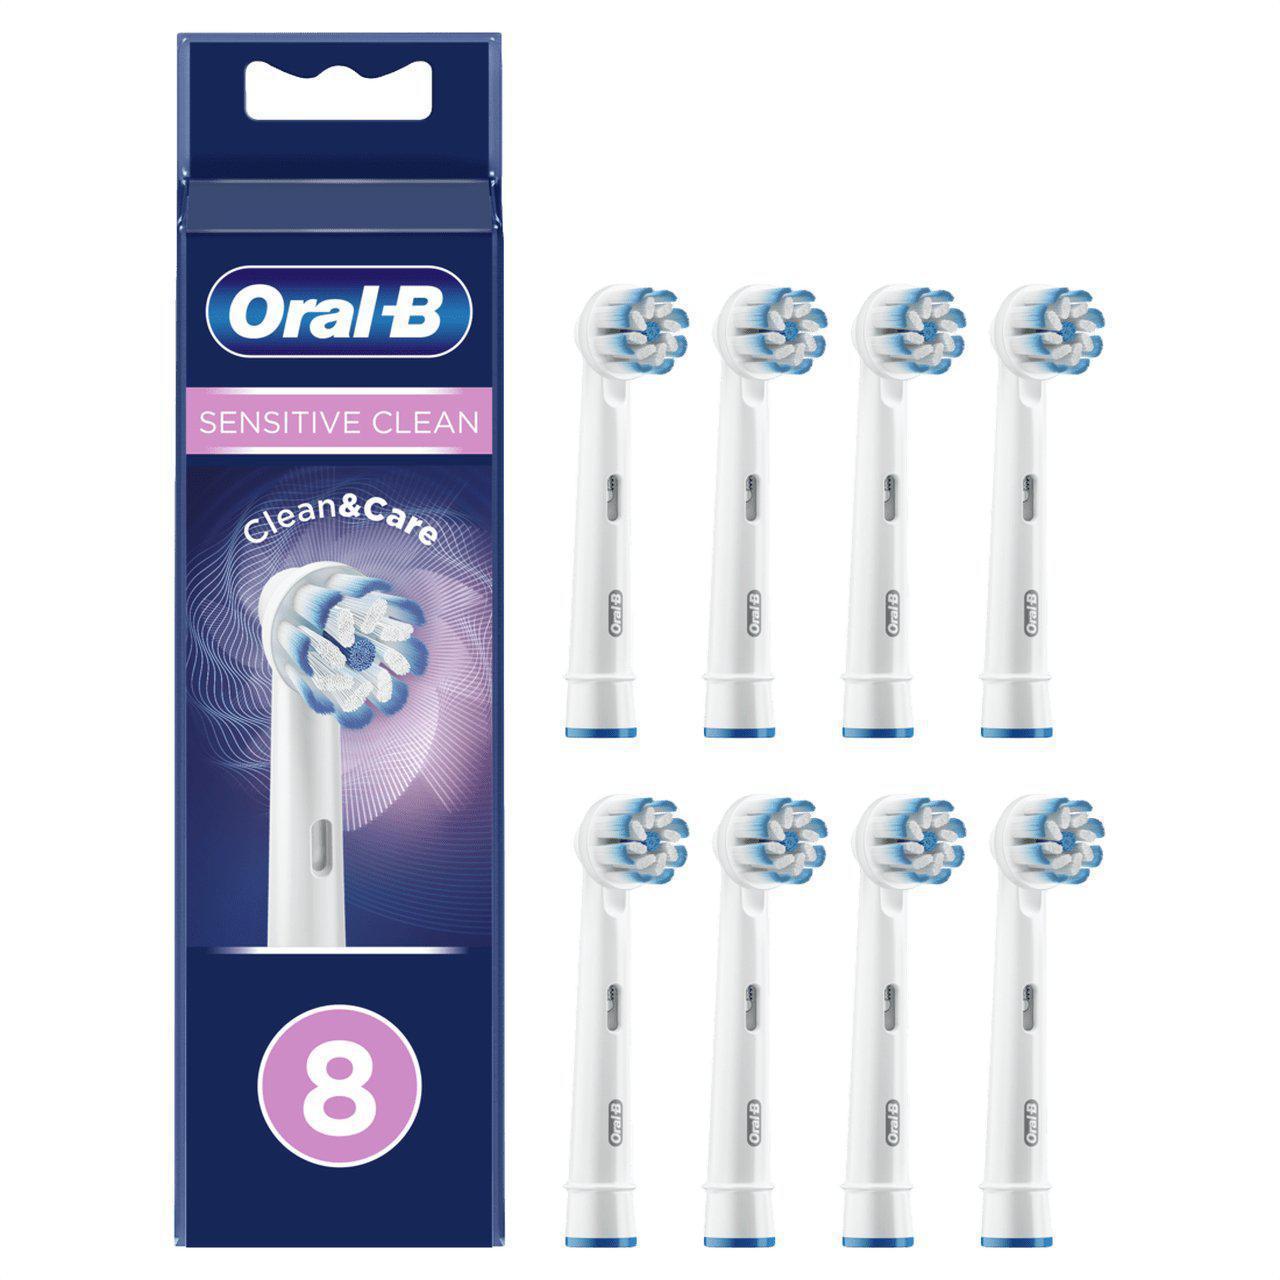 Oral-B Sensitive Clean 8pk Toothbrush Refill Heads - Soft Bristles - Healthxpress.ie